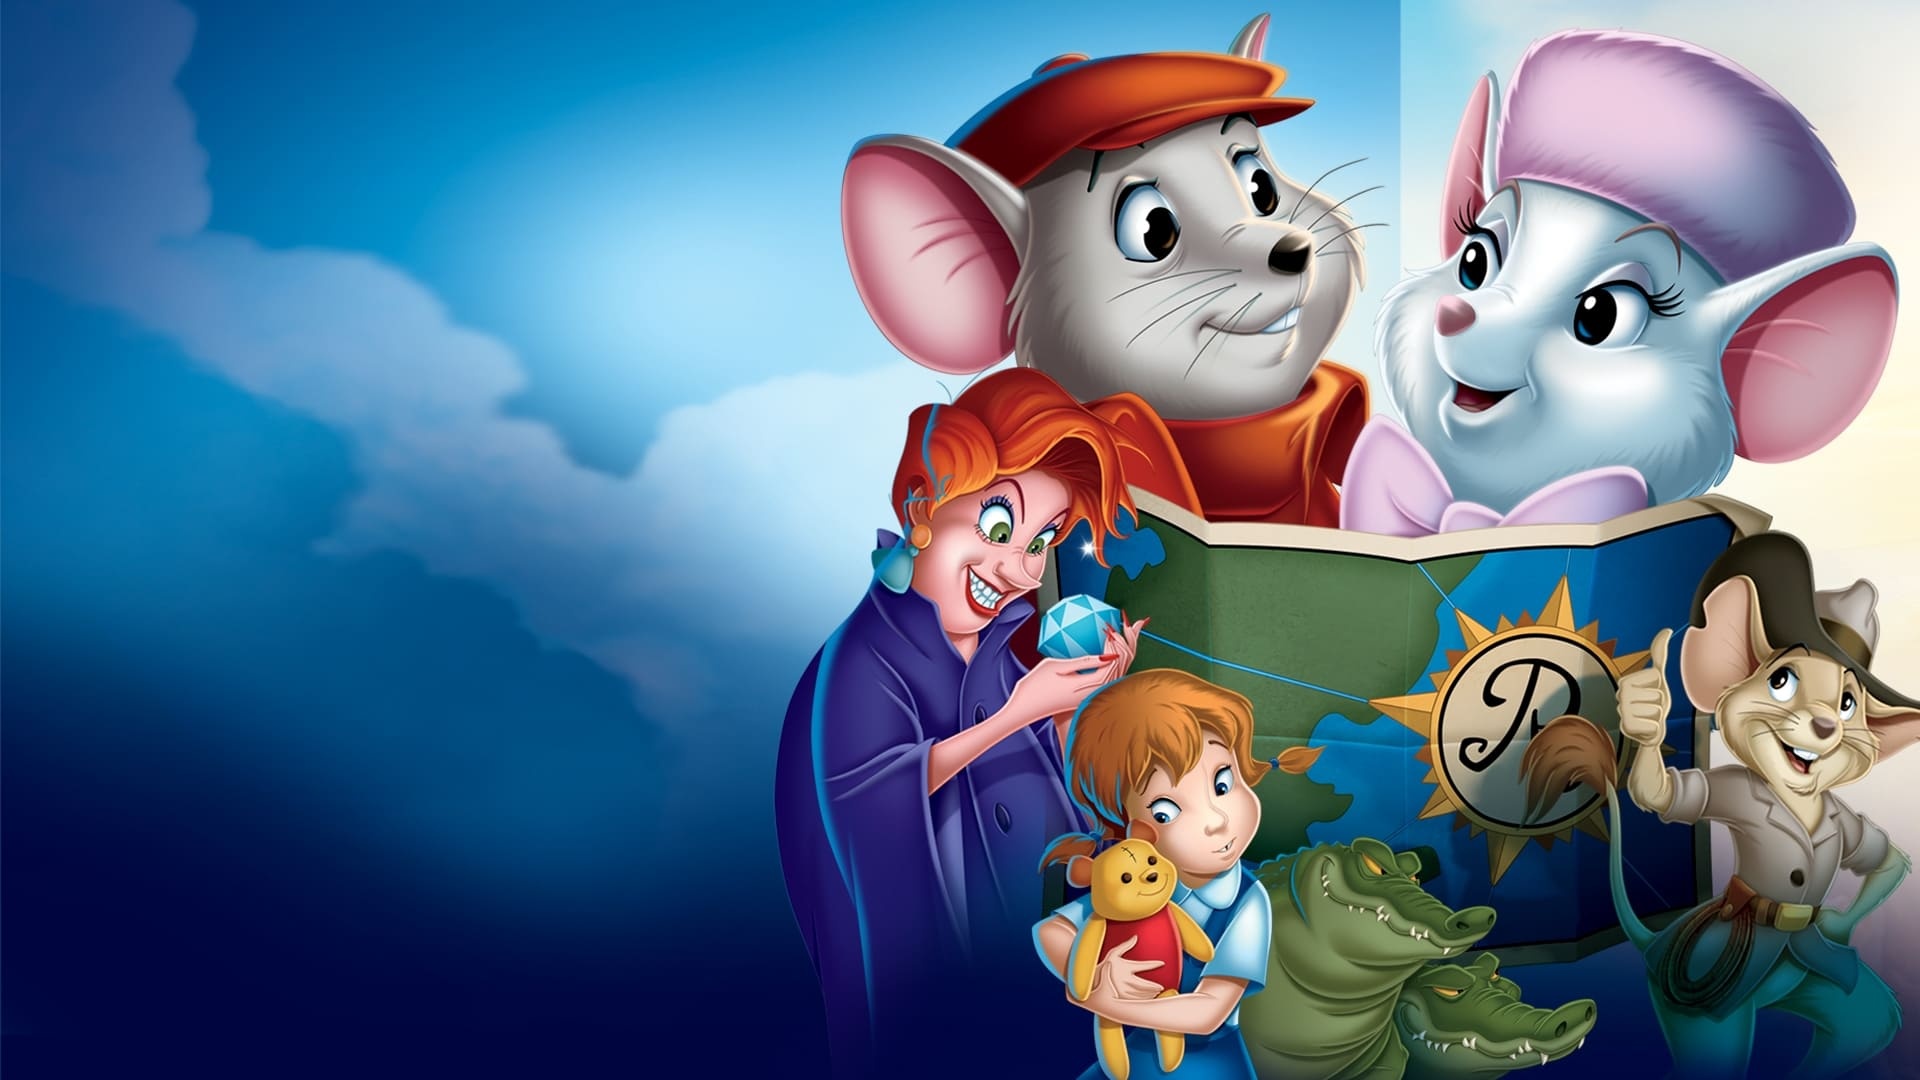 The Rescuers, Rescue missions, Endearing characters, Disney animation, 1920x1080 Full HD Desktop